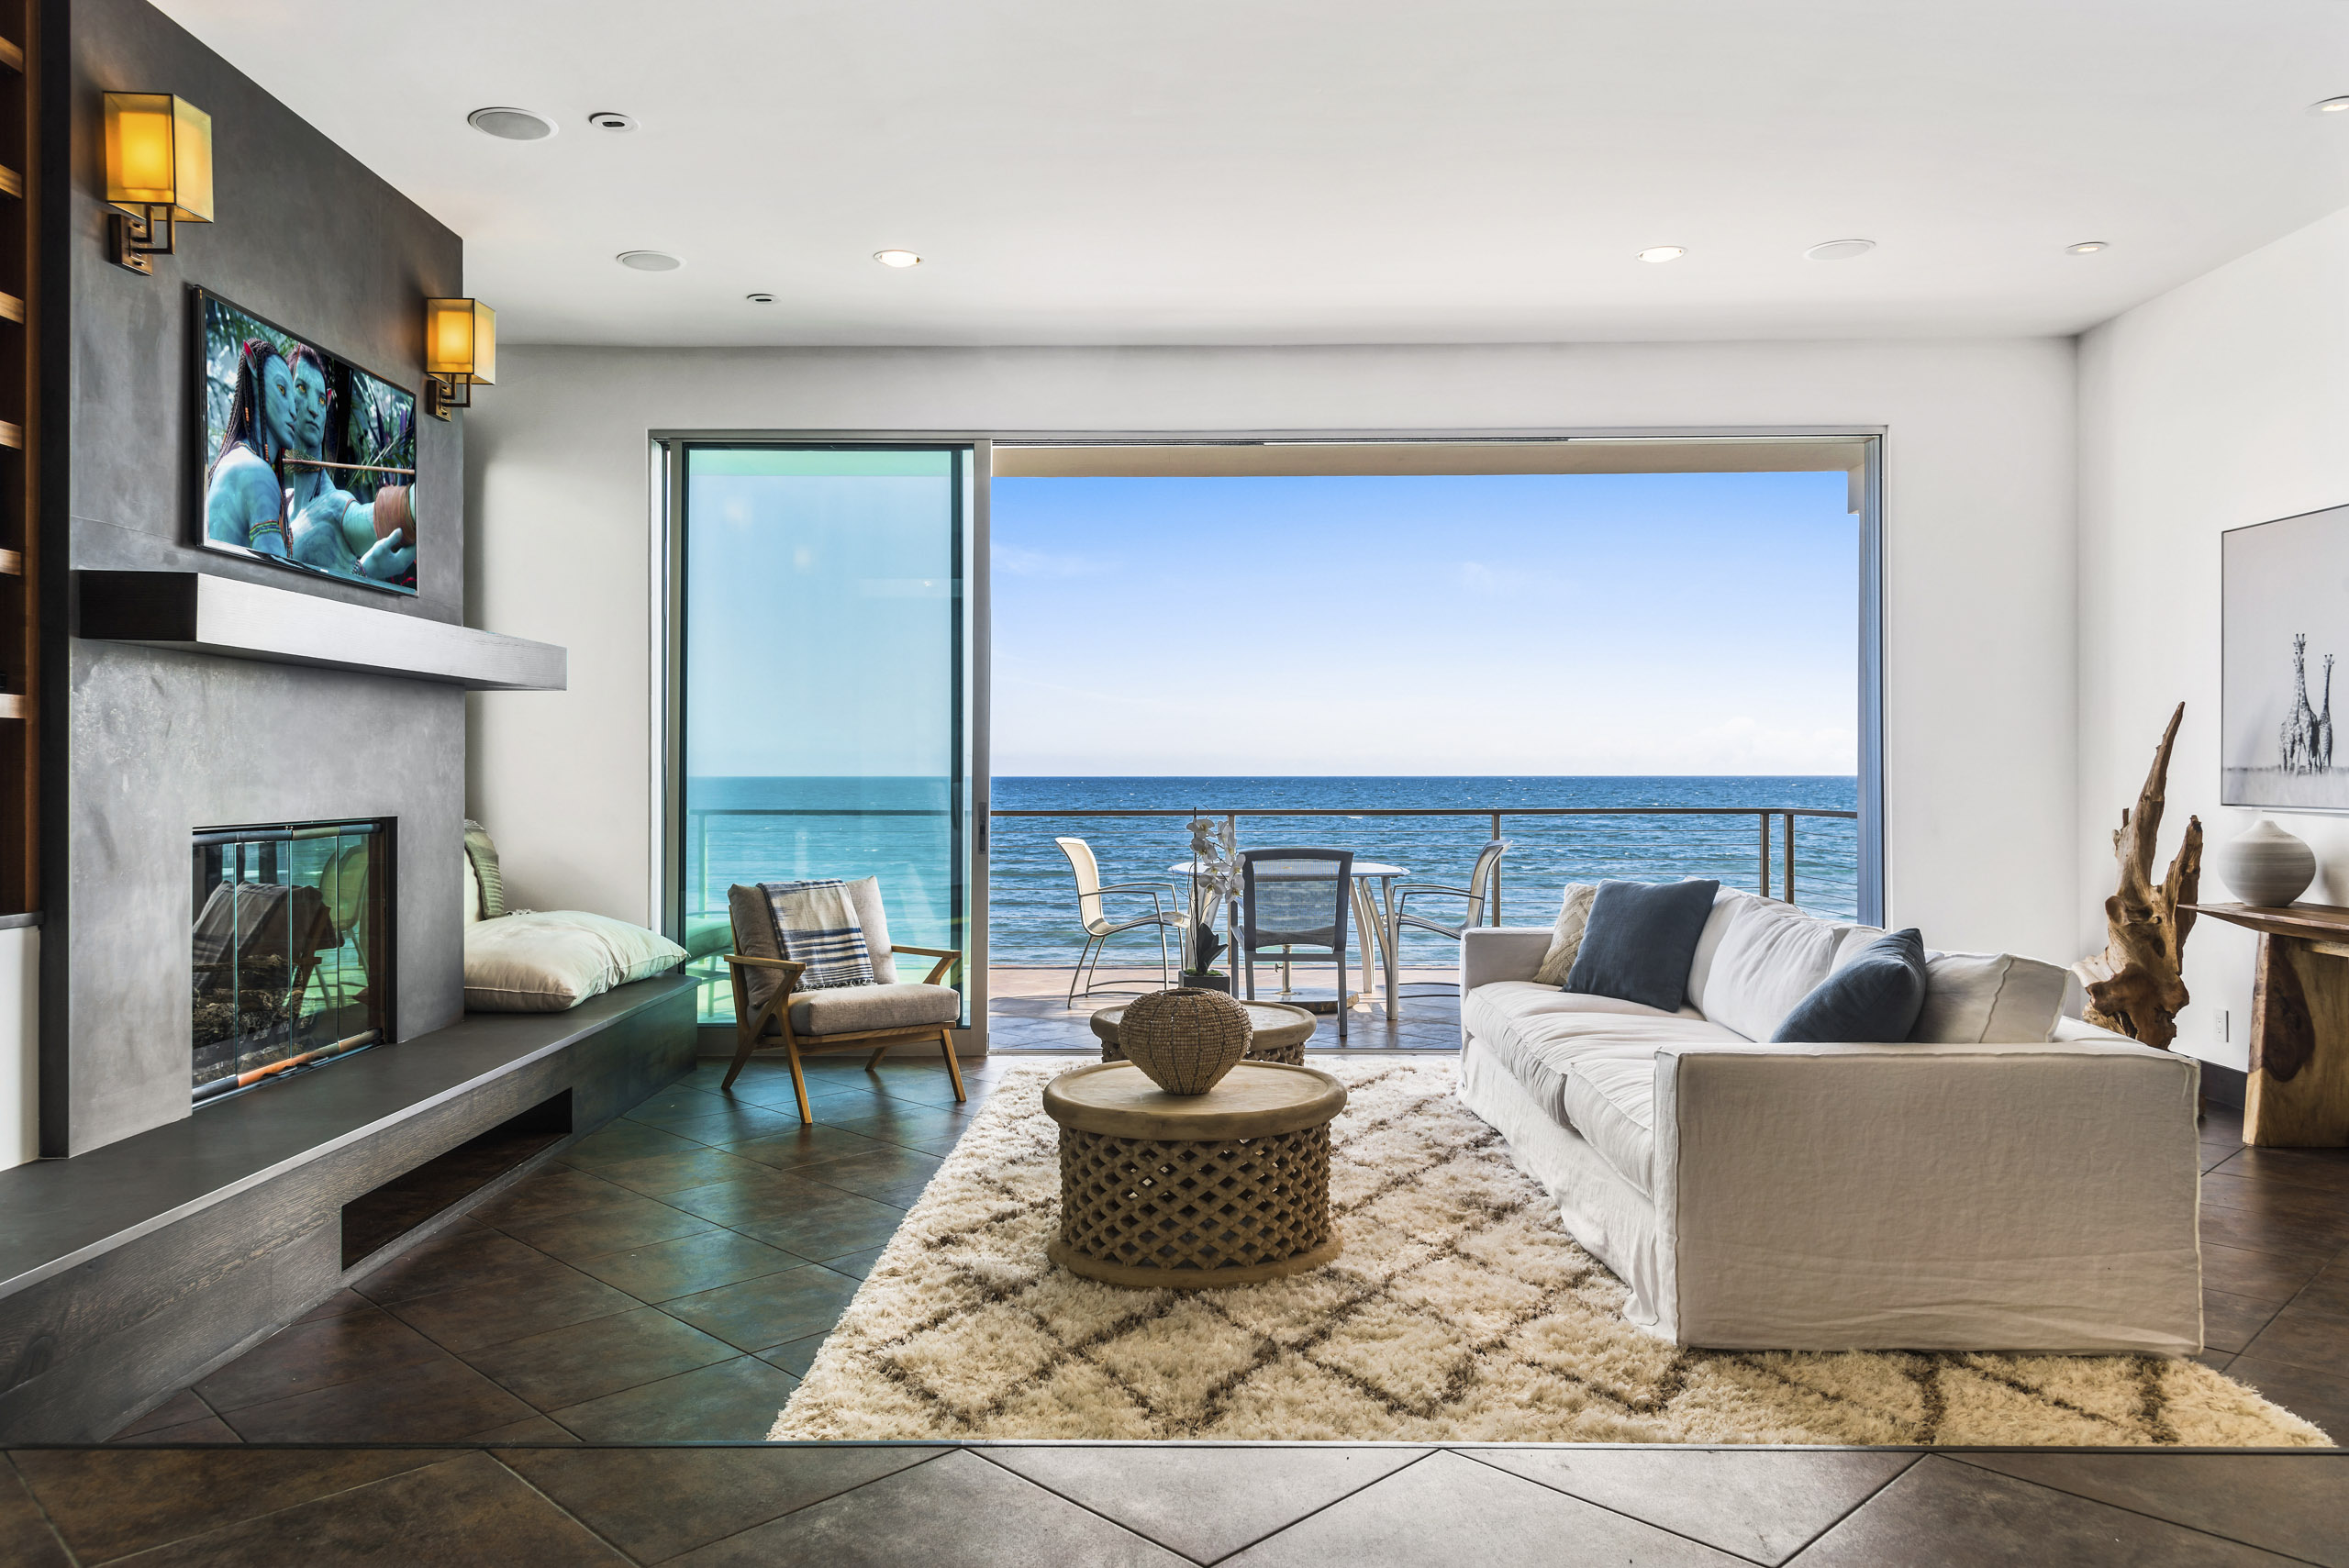 PCH Beach House - Holst Brothers